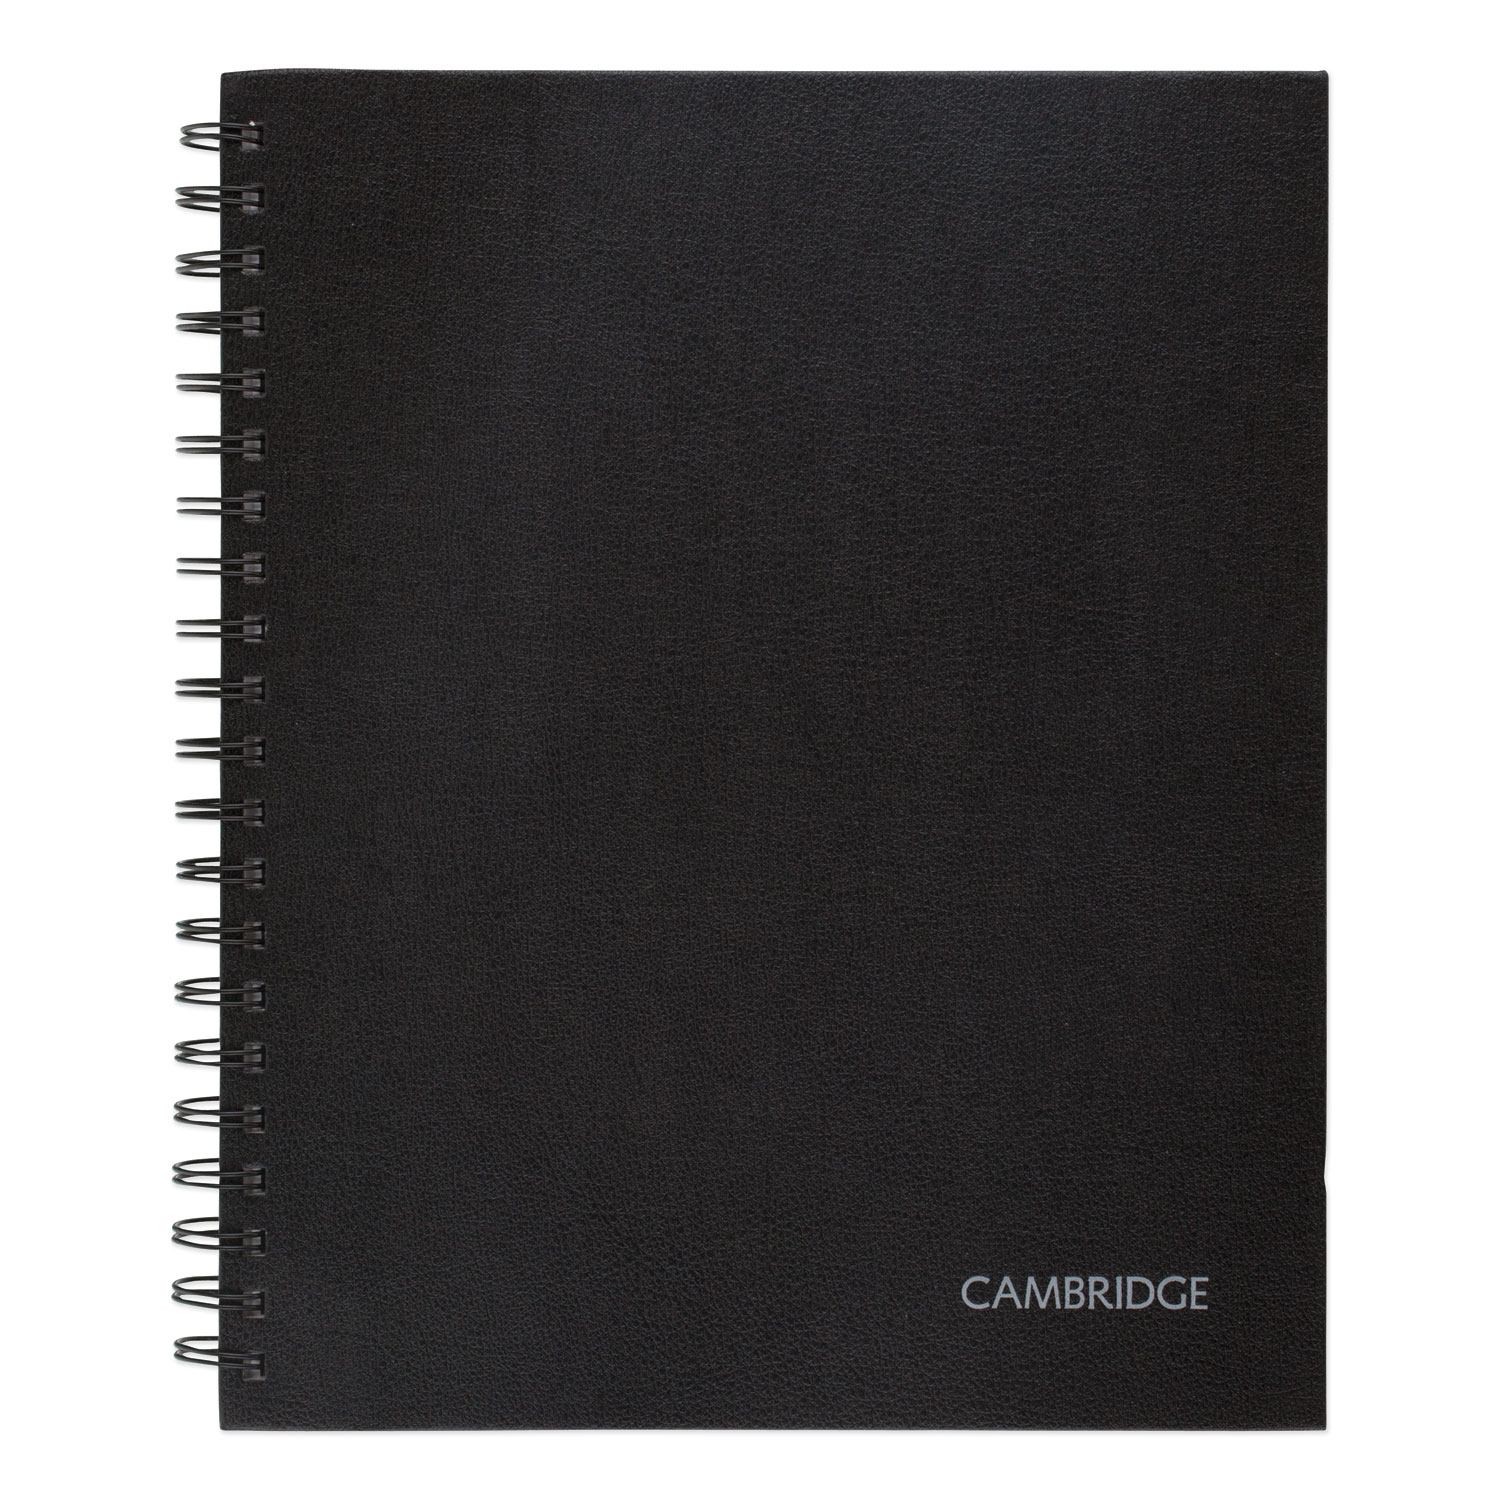  Cambridge Limited 06100 Hardbound Notebook w/ Pocket, 1 Subject, Wide/Legal Rule, Black Cover, 11 x 8.5, 96 Sheets (MEA06100) 